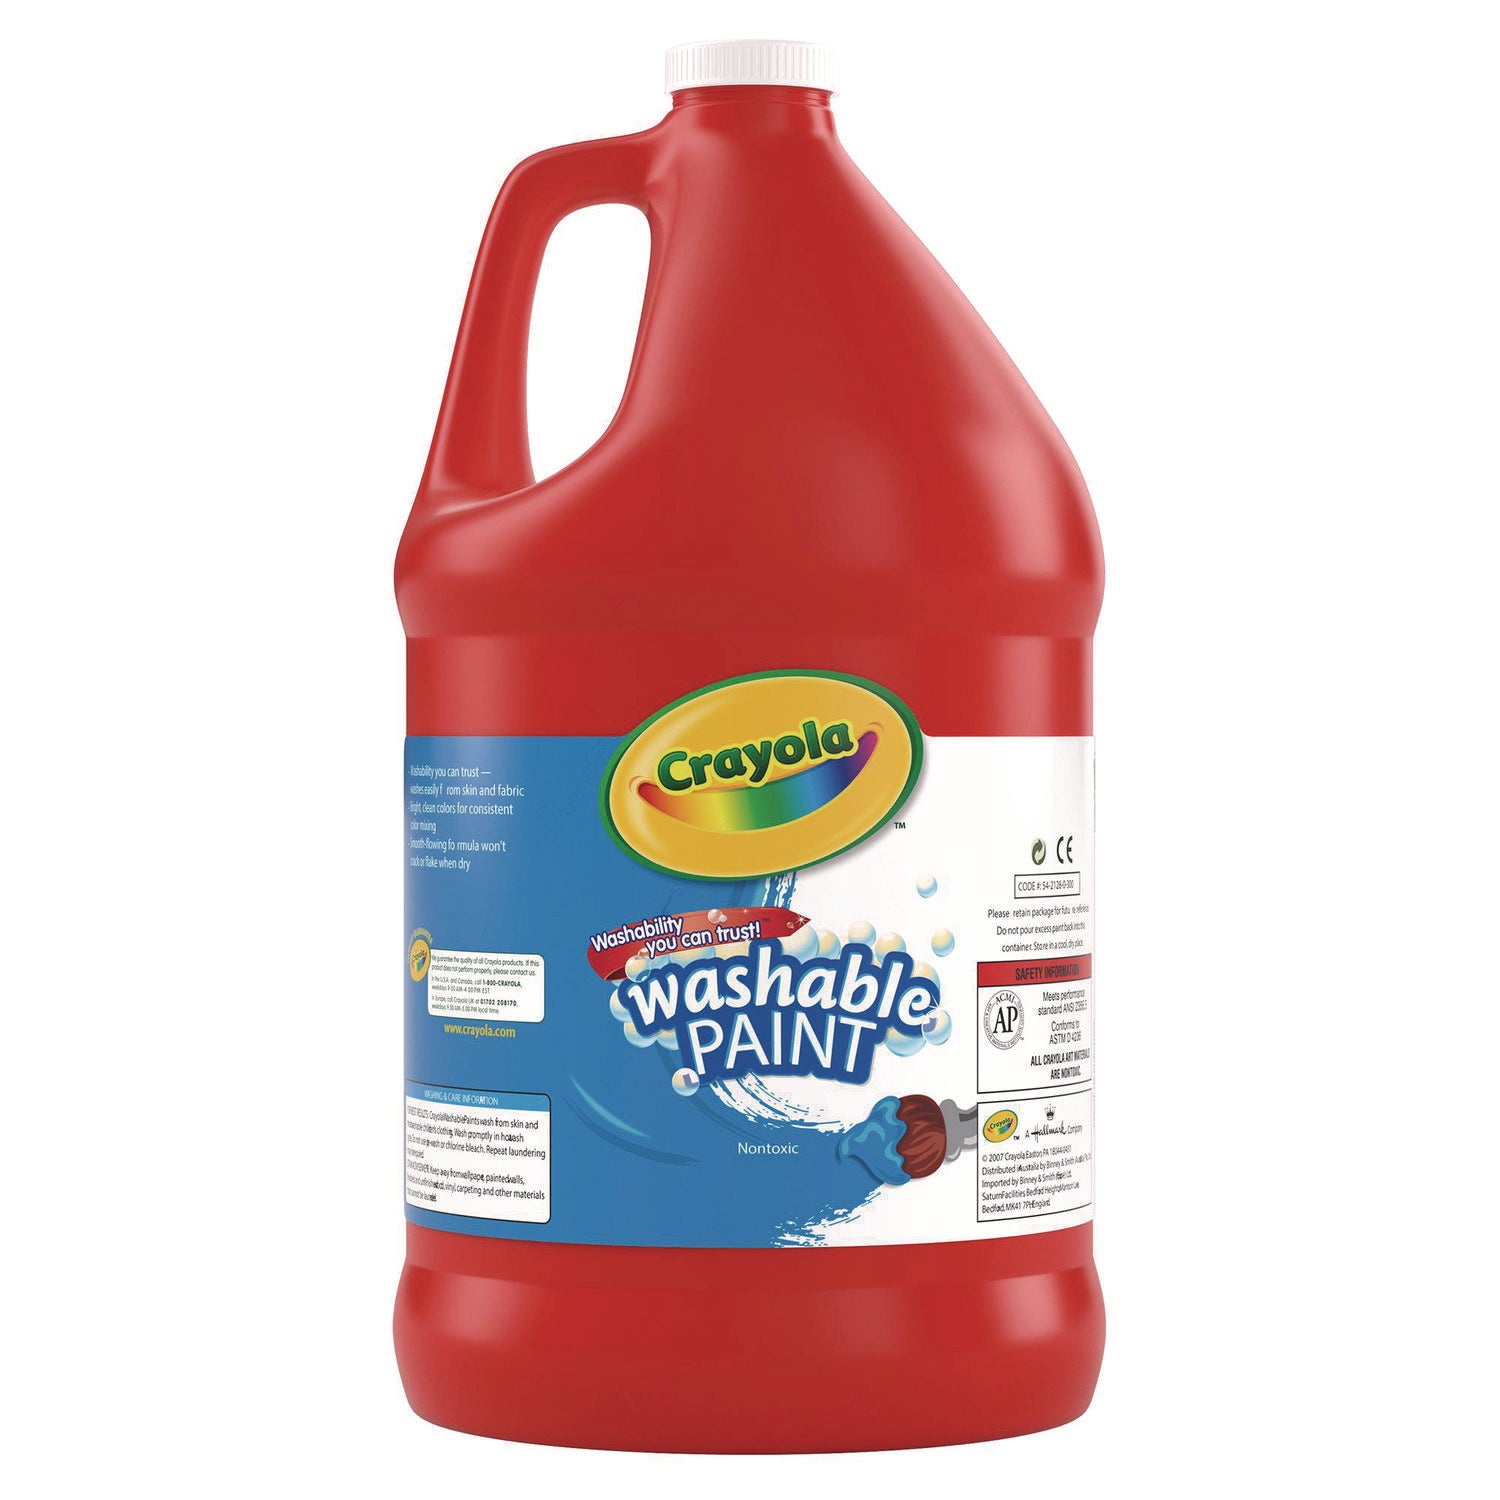 Washable Paint, Red, 1 gal Bottle - 8